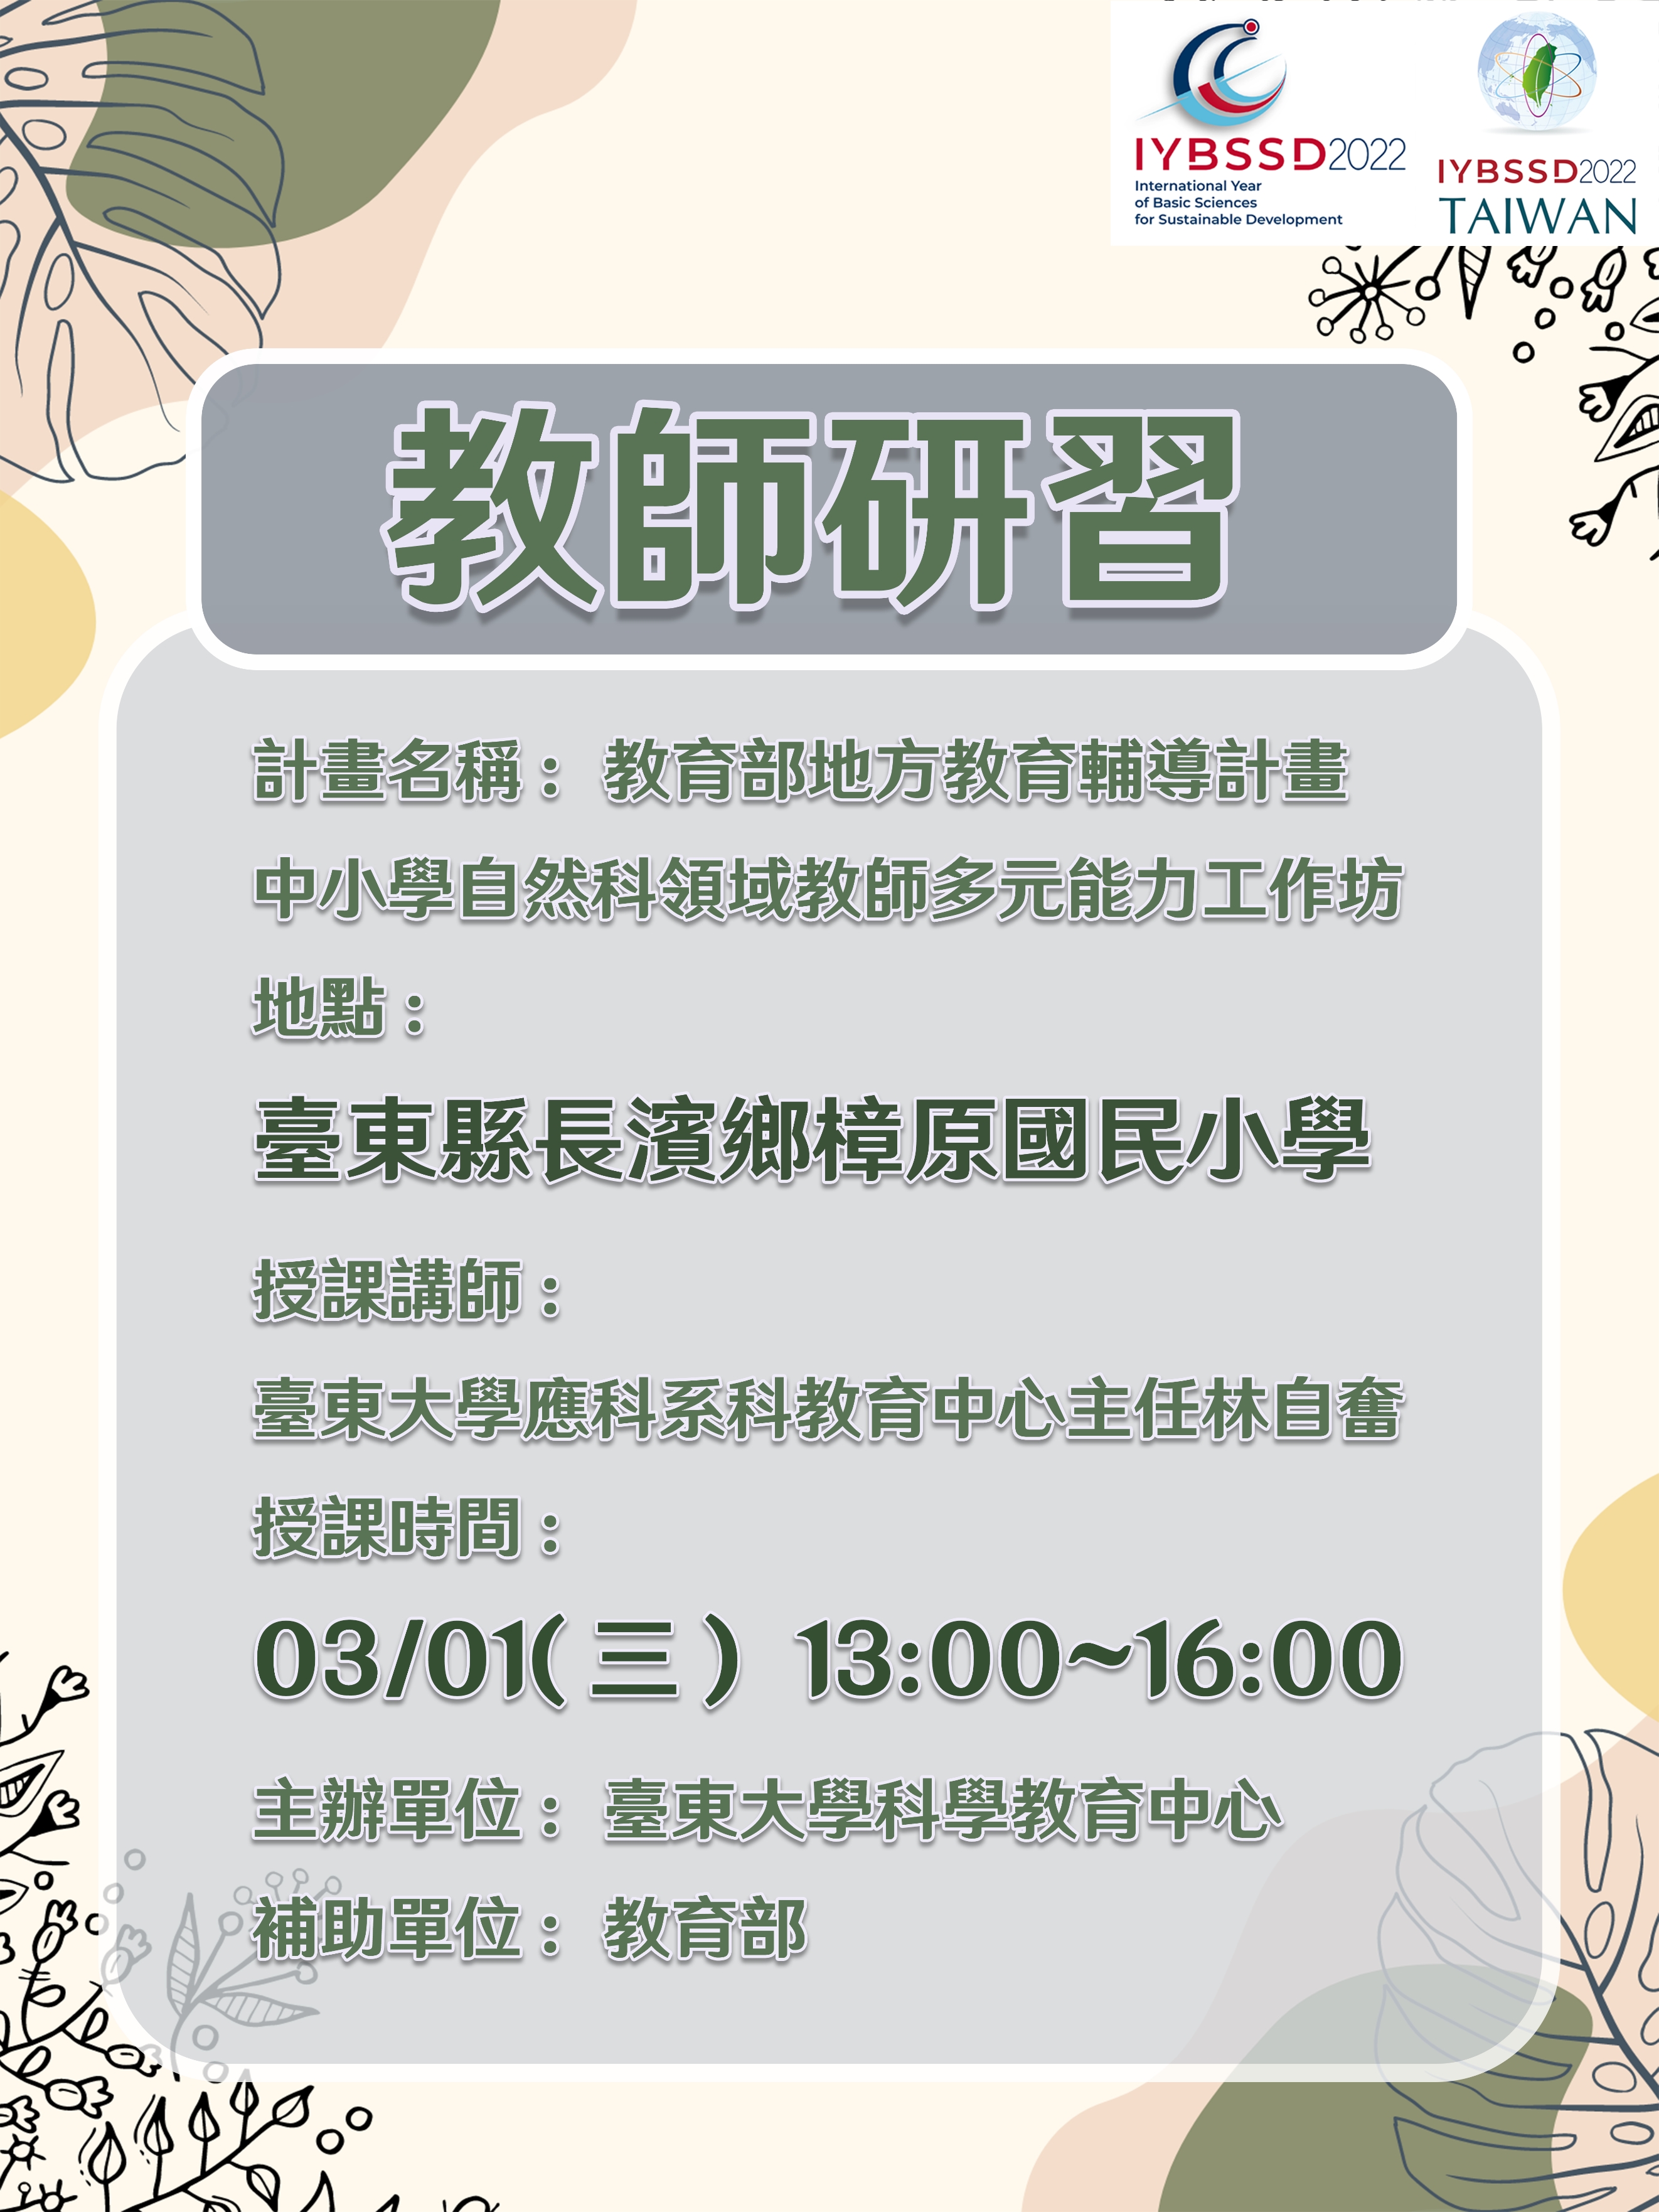 Professional Development Workshop for Elementary Science Teachers of Taitung County Promotional Graphics or Posters